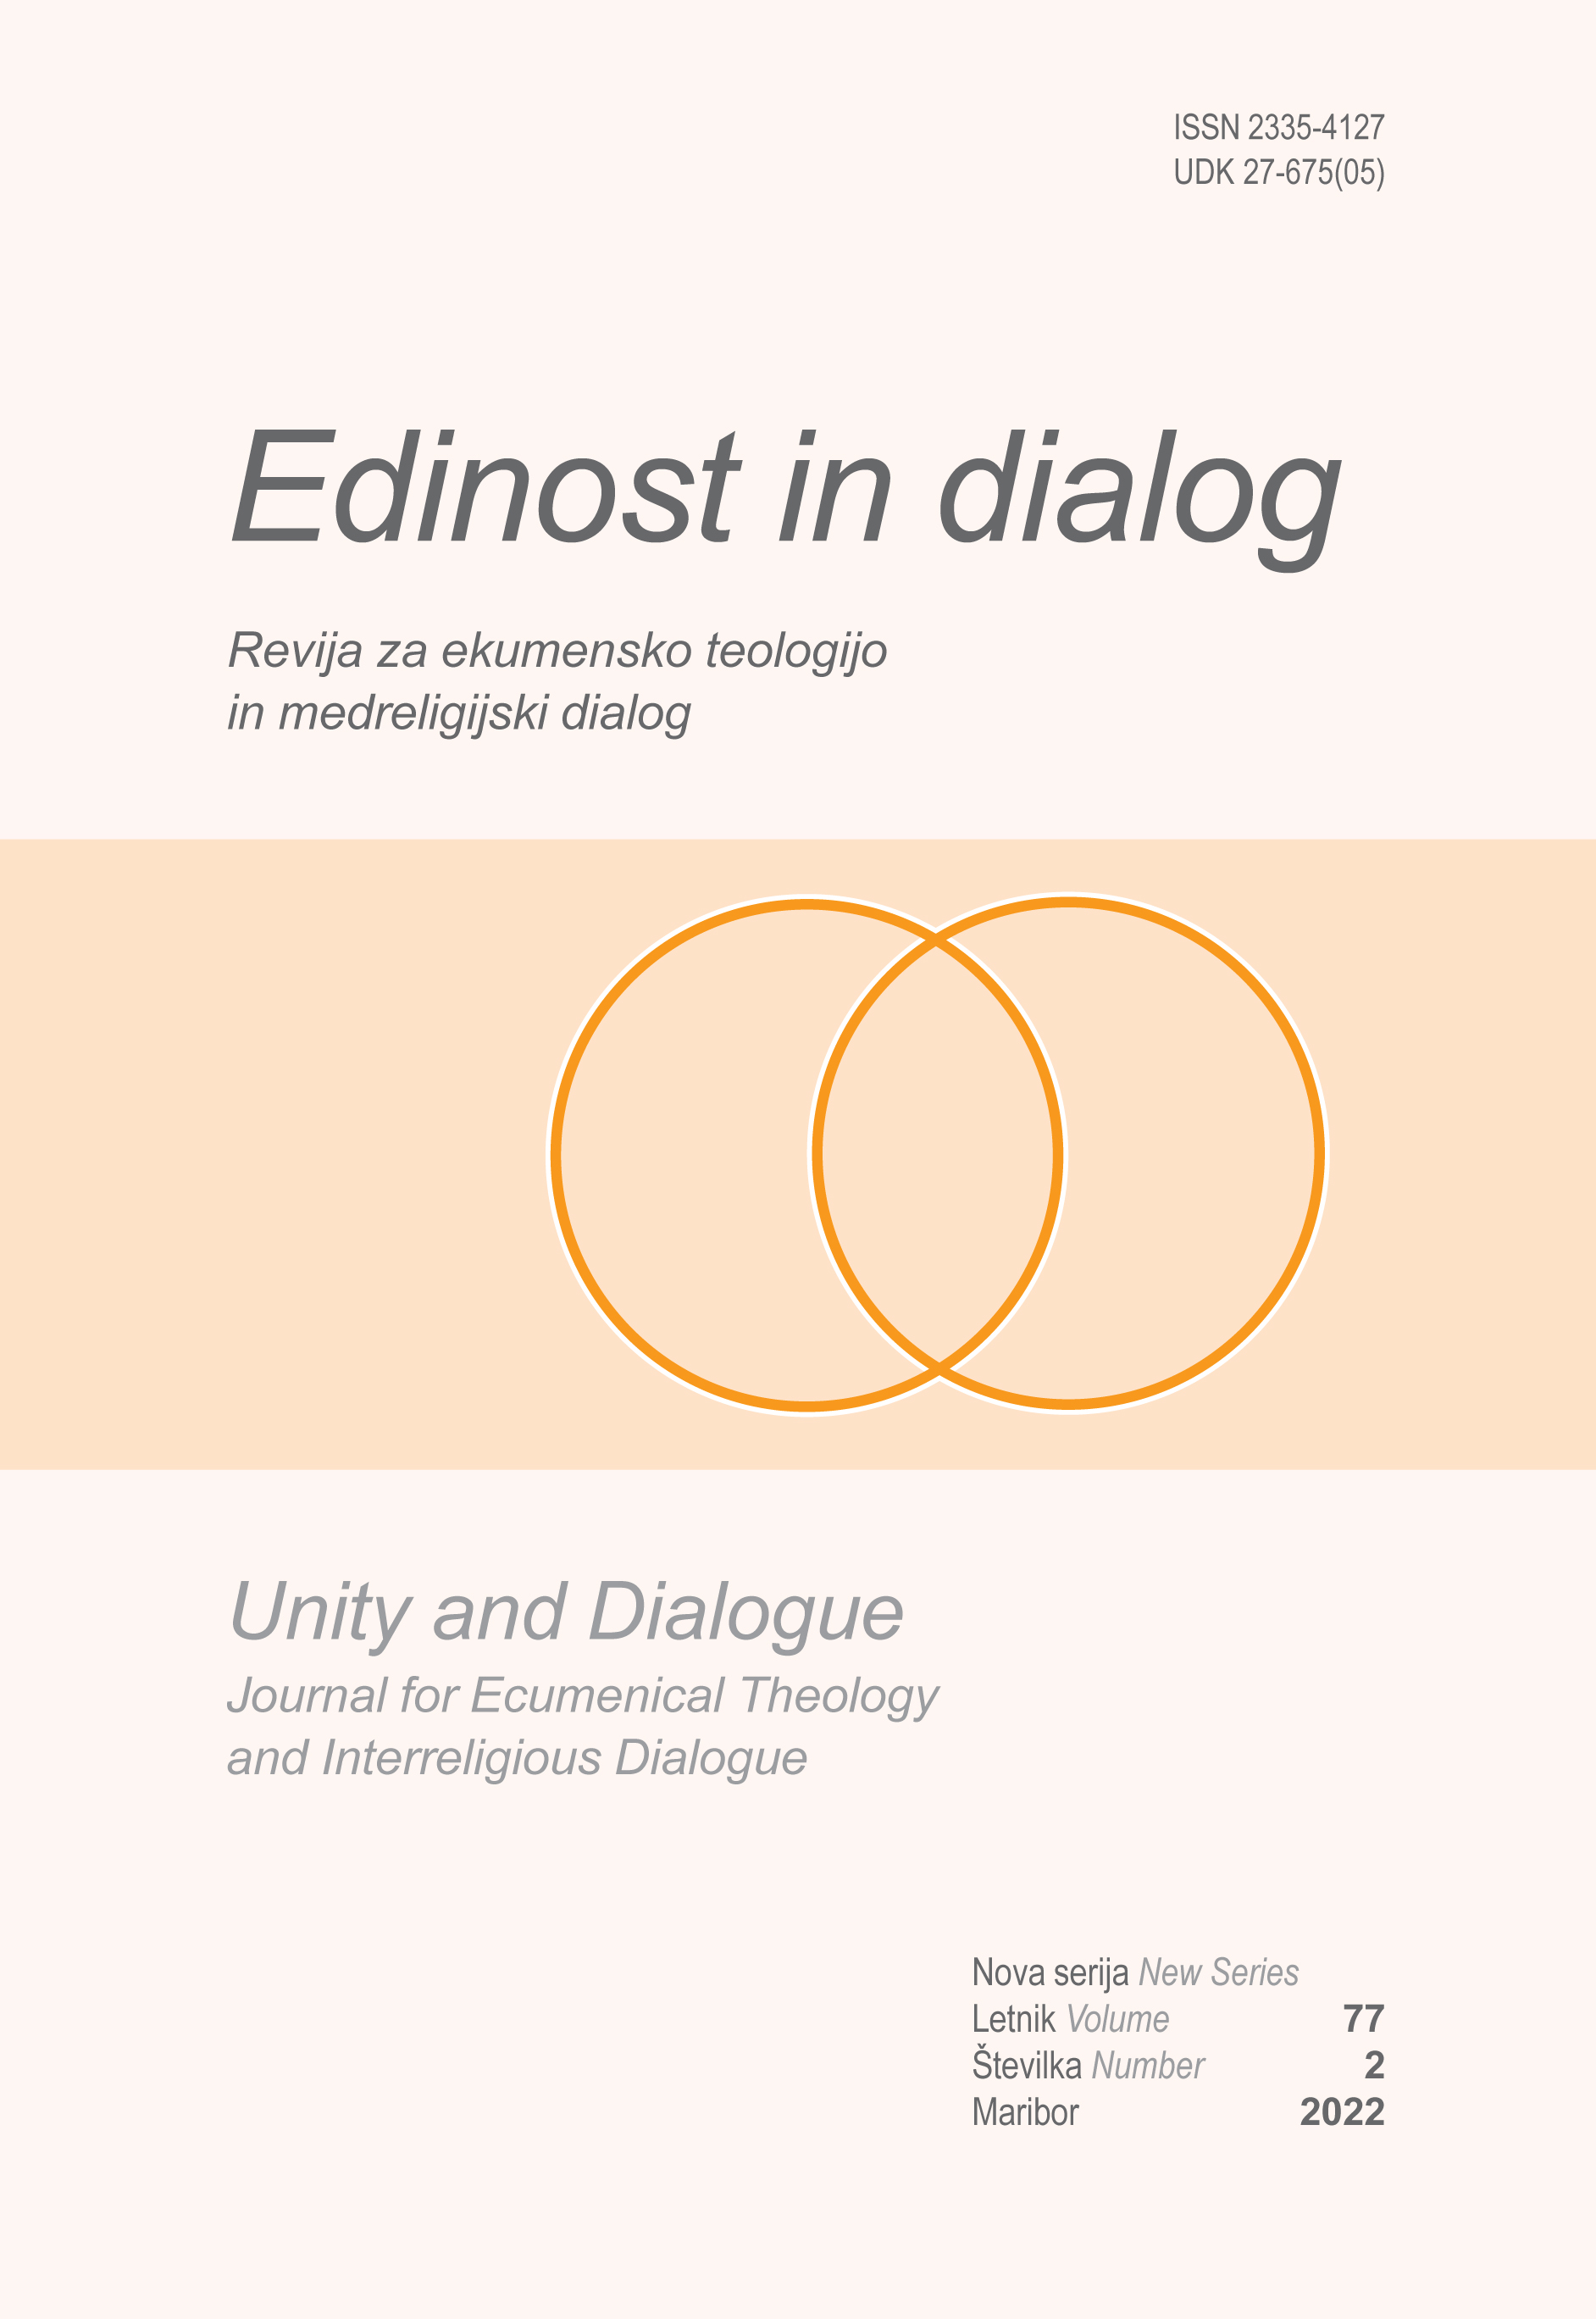 Journal cover of the journal Edinost in Dialog. The journal cover is a very light orange, with a slightly darker shade of orange coming across as a band, with two orange circles in the middle of the band. 